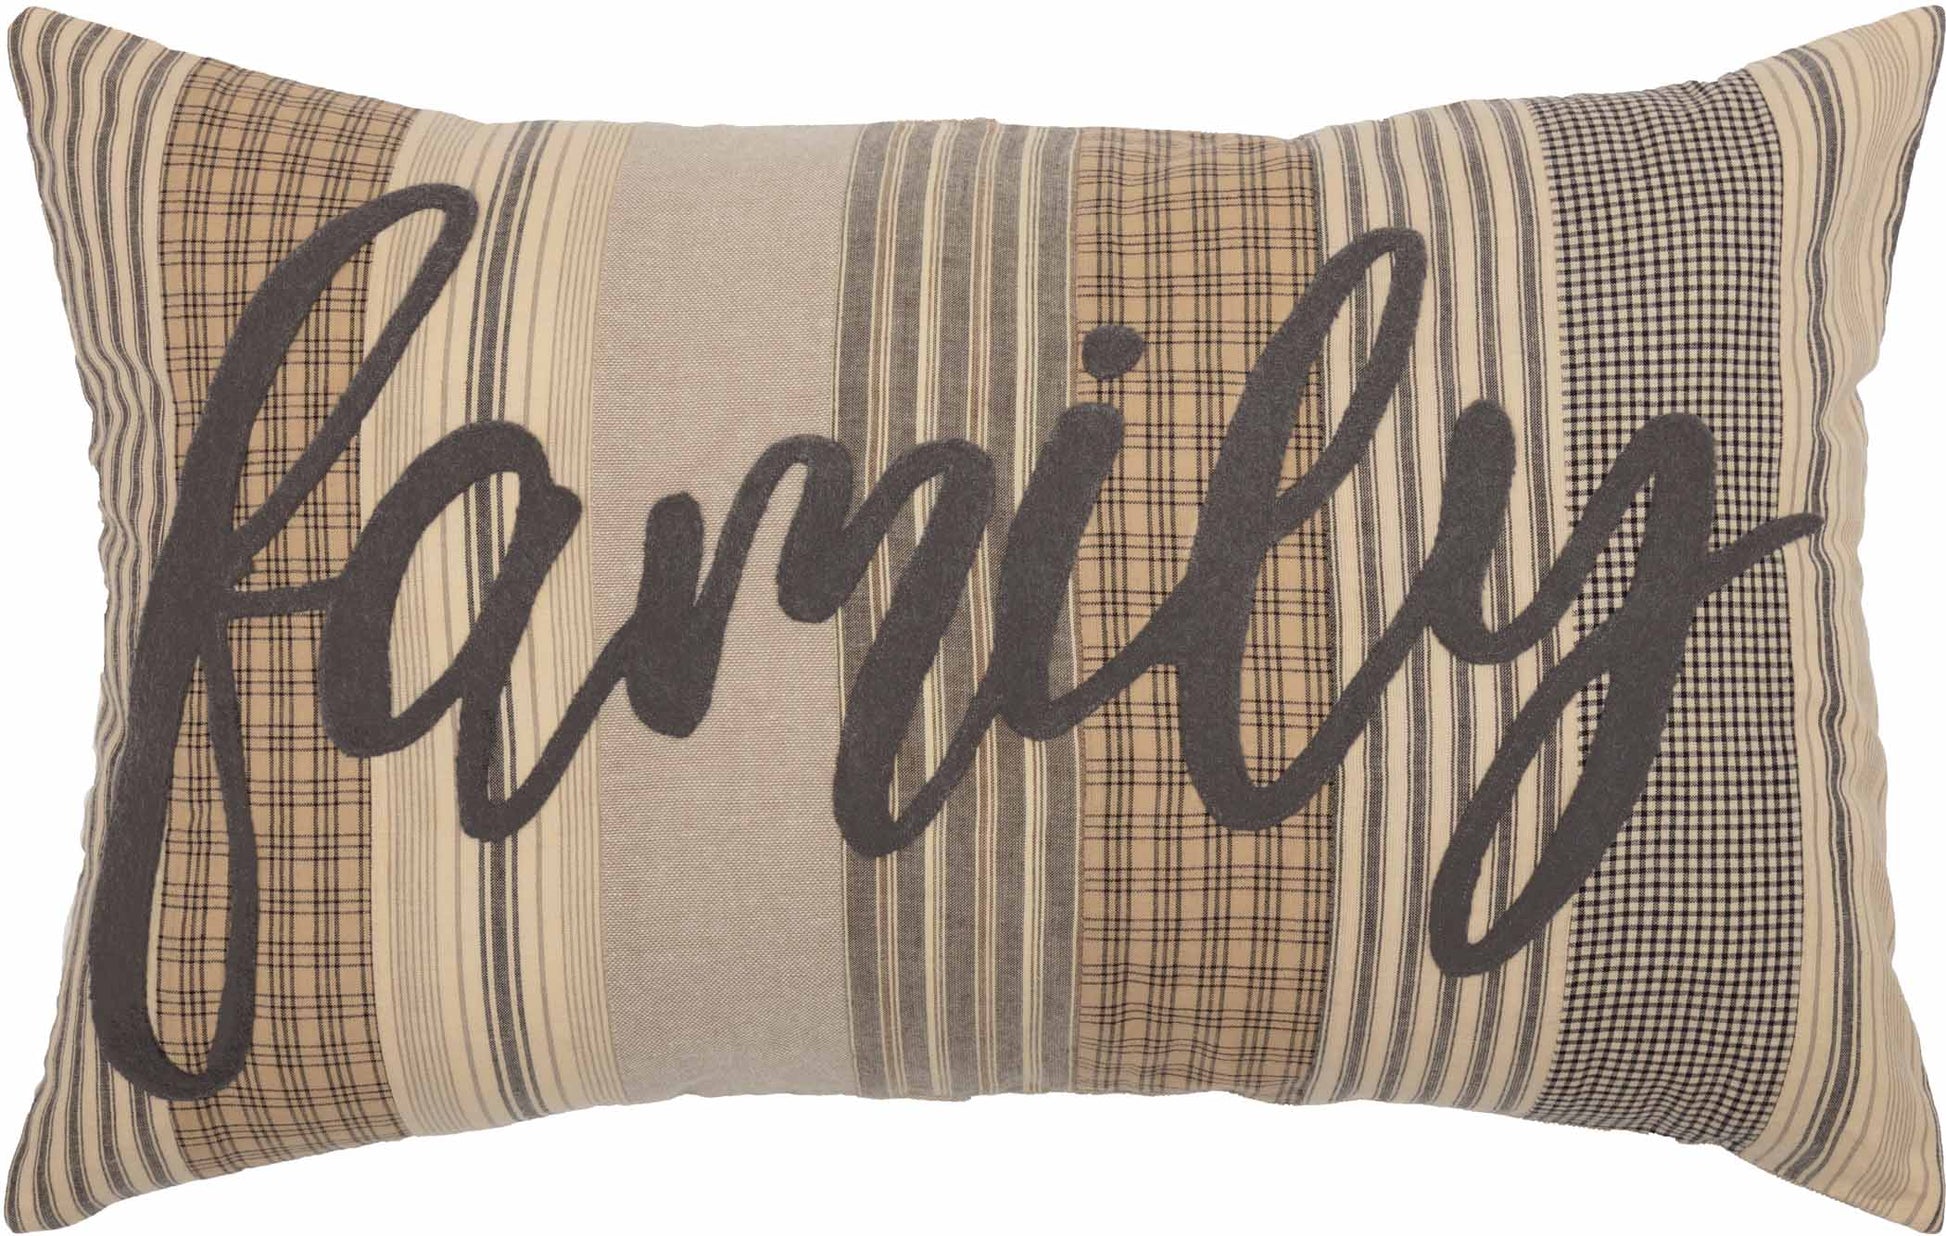 REFRIED Apparel decorative pillow – Colby-Sawyer Campus Store